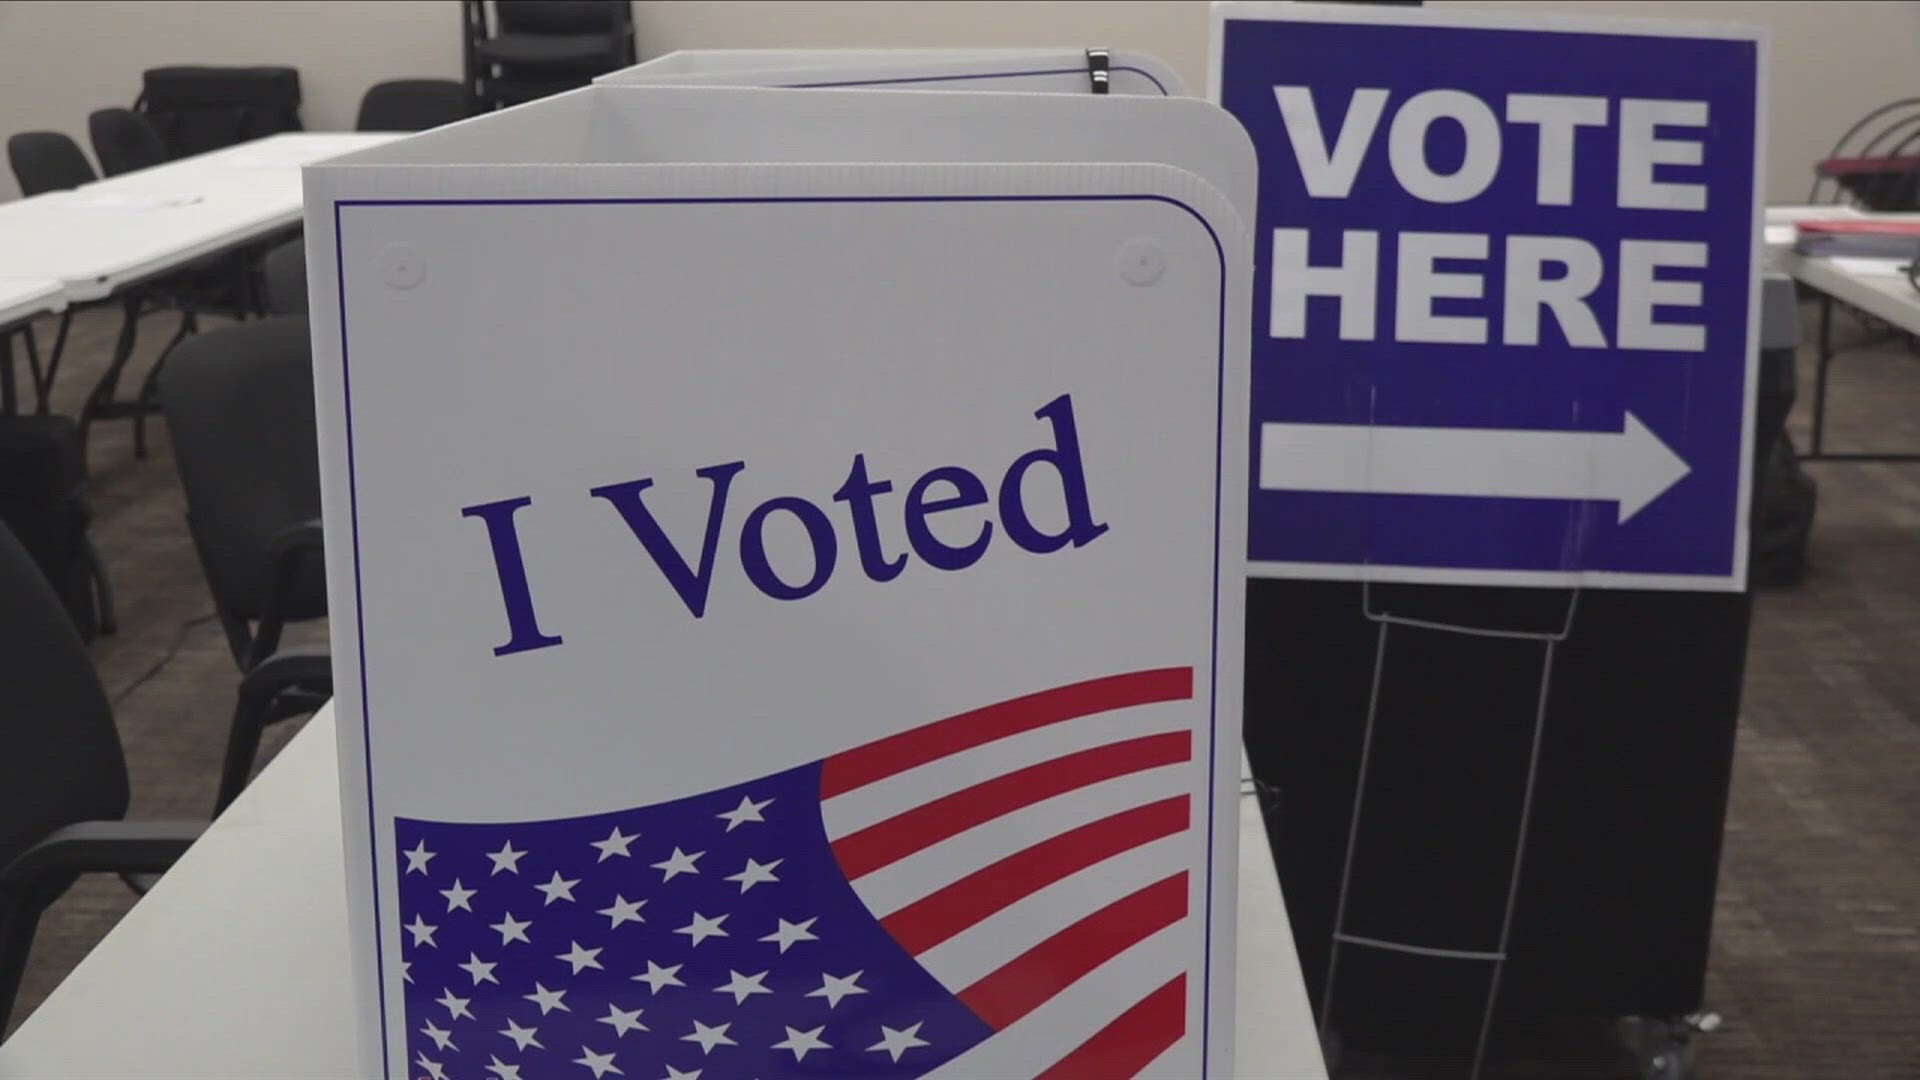 The Arkansas Election Commissioners board is considering phasing out electronic voter registration.